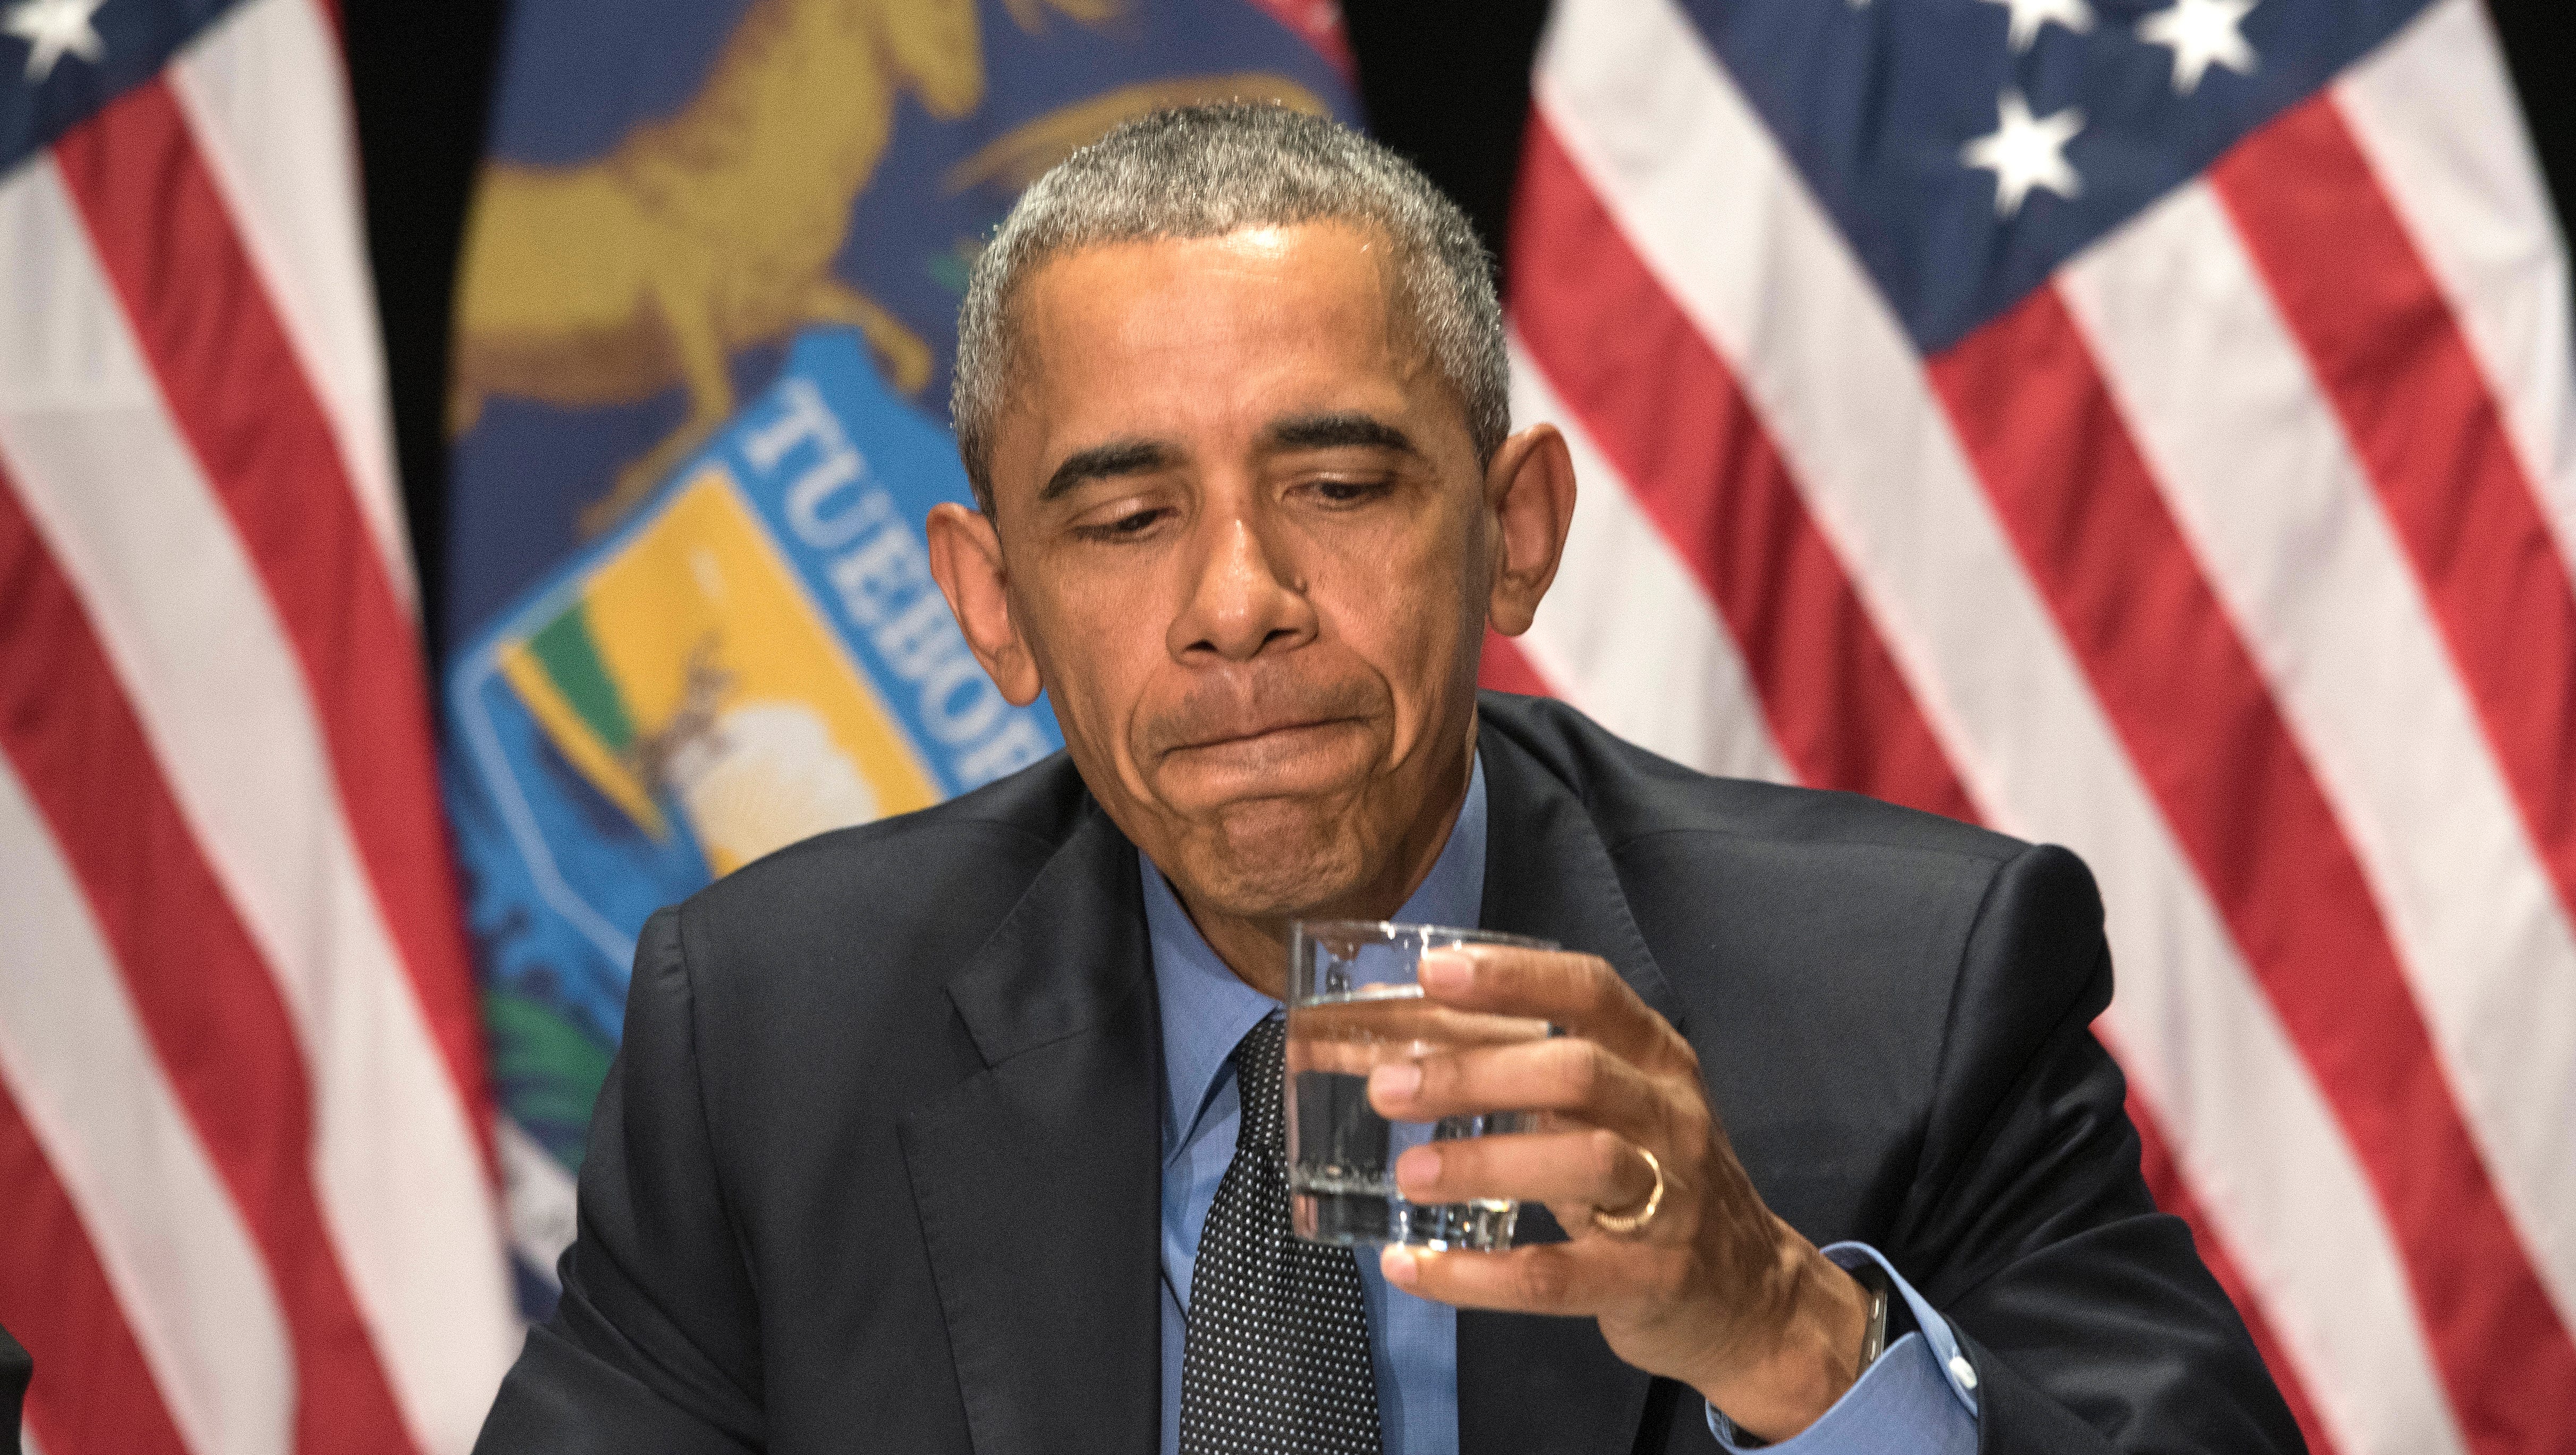 "If you're using a filter ... then Flint water at this point is drinkable," President Obama said.